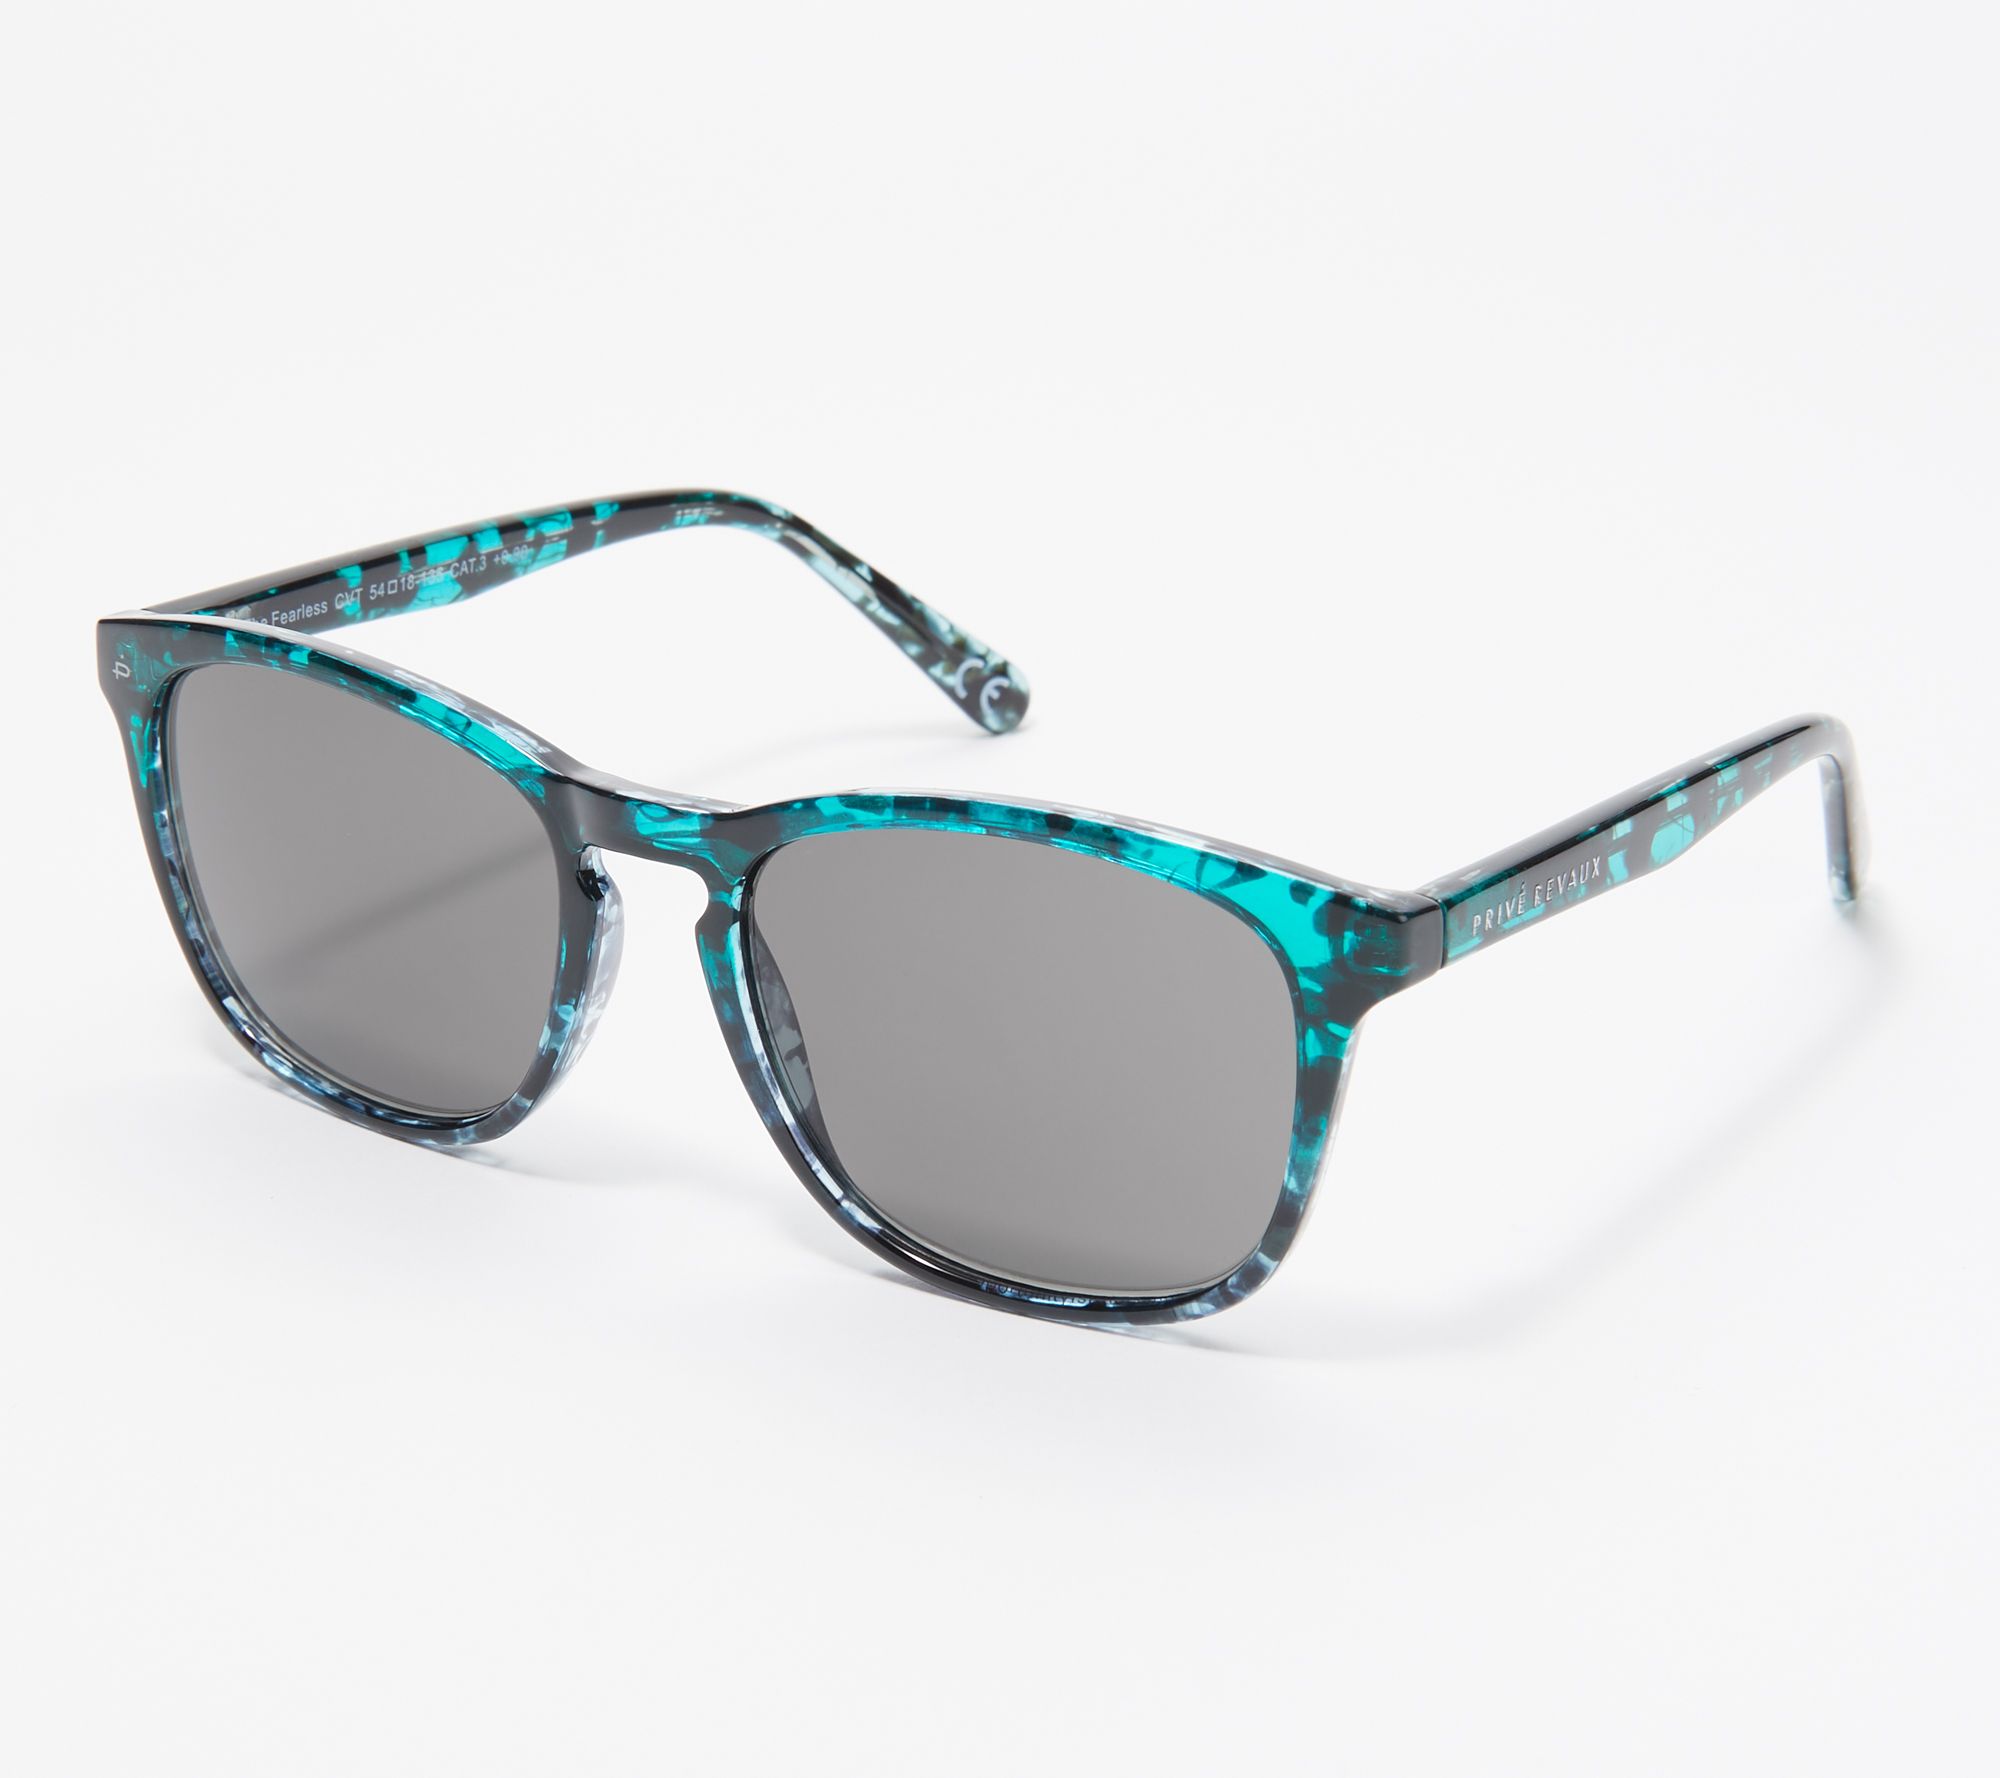 Item: Flying Dove Sunglasses Brand: 3.Paradis (Authentic) A must-add to  your accessories!